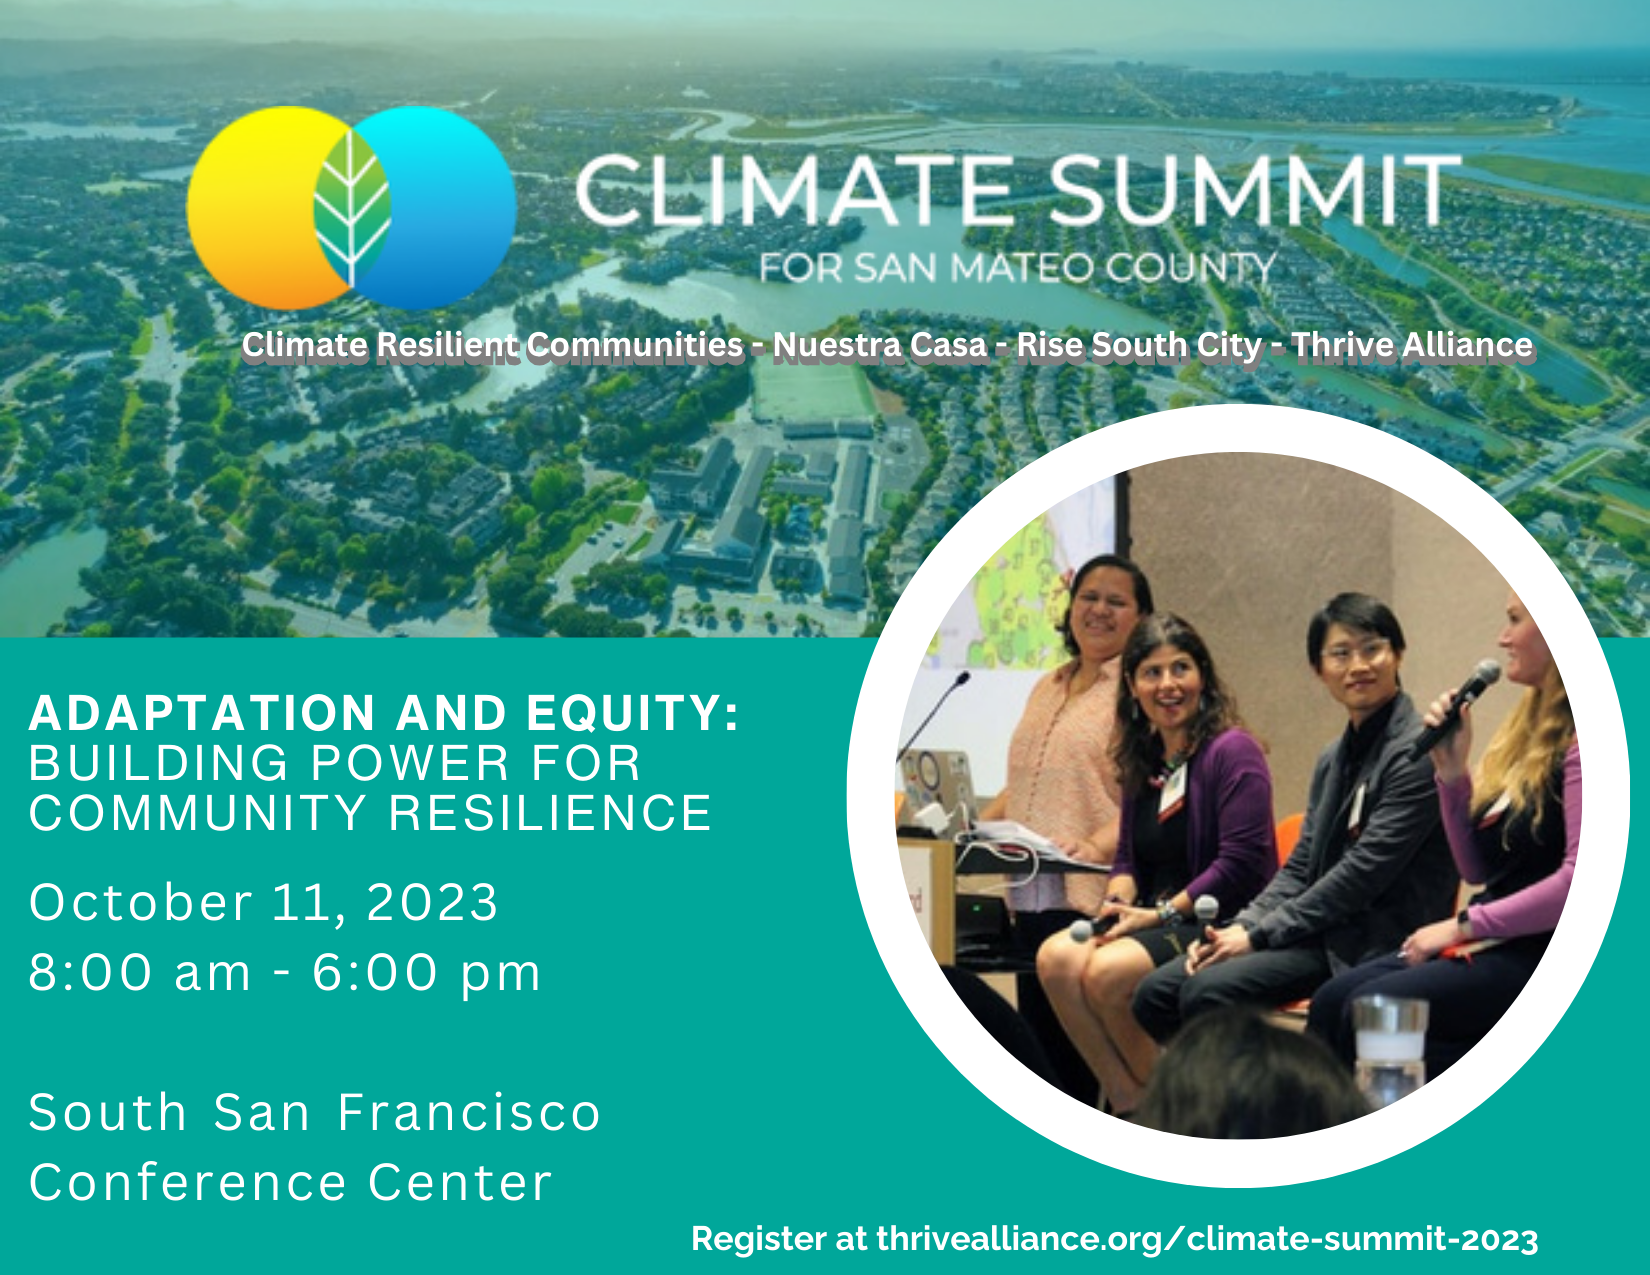 San Mateo County to Hold Second Annual Climate Summit